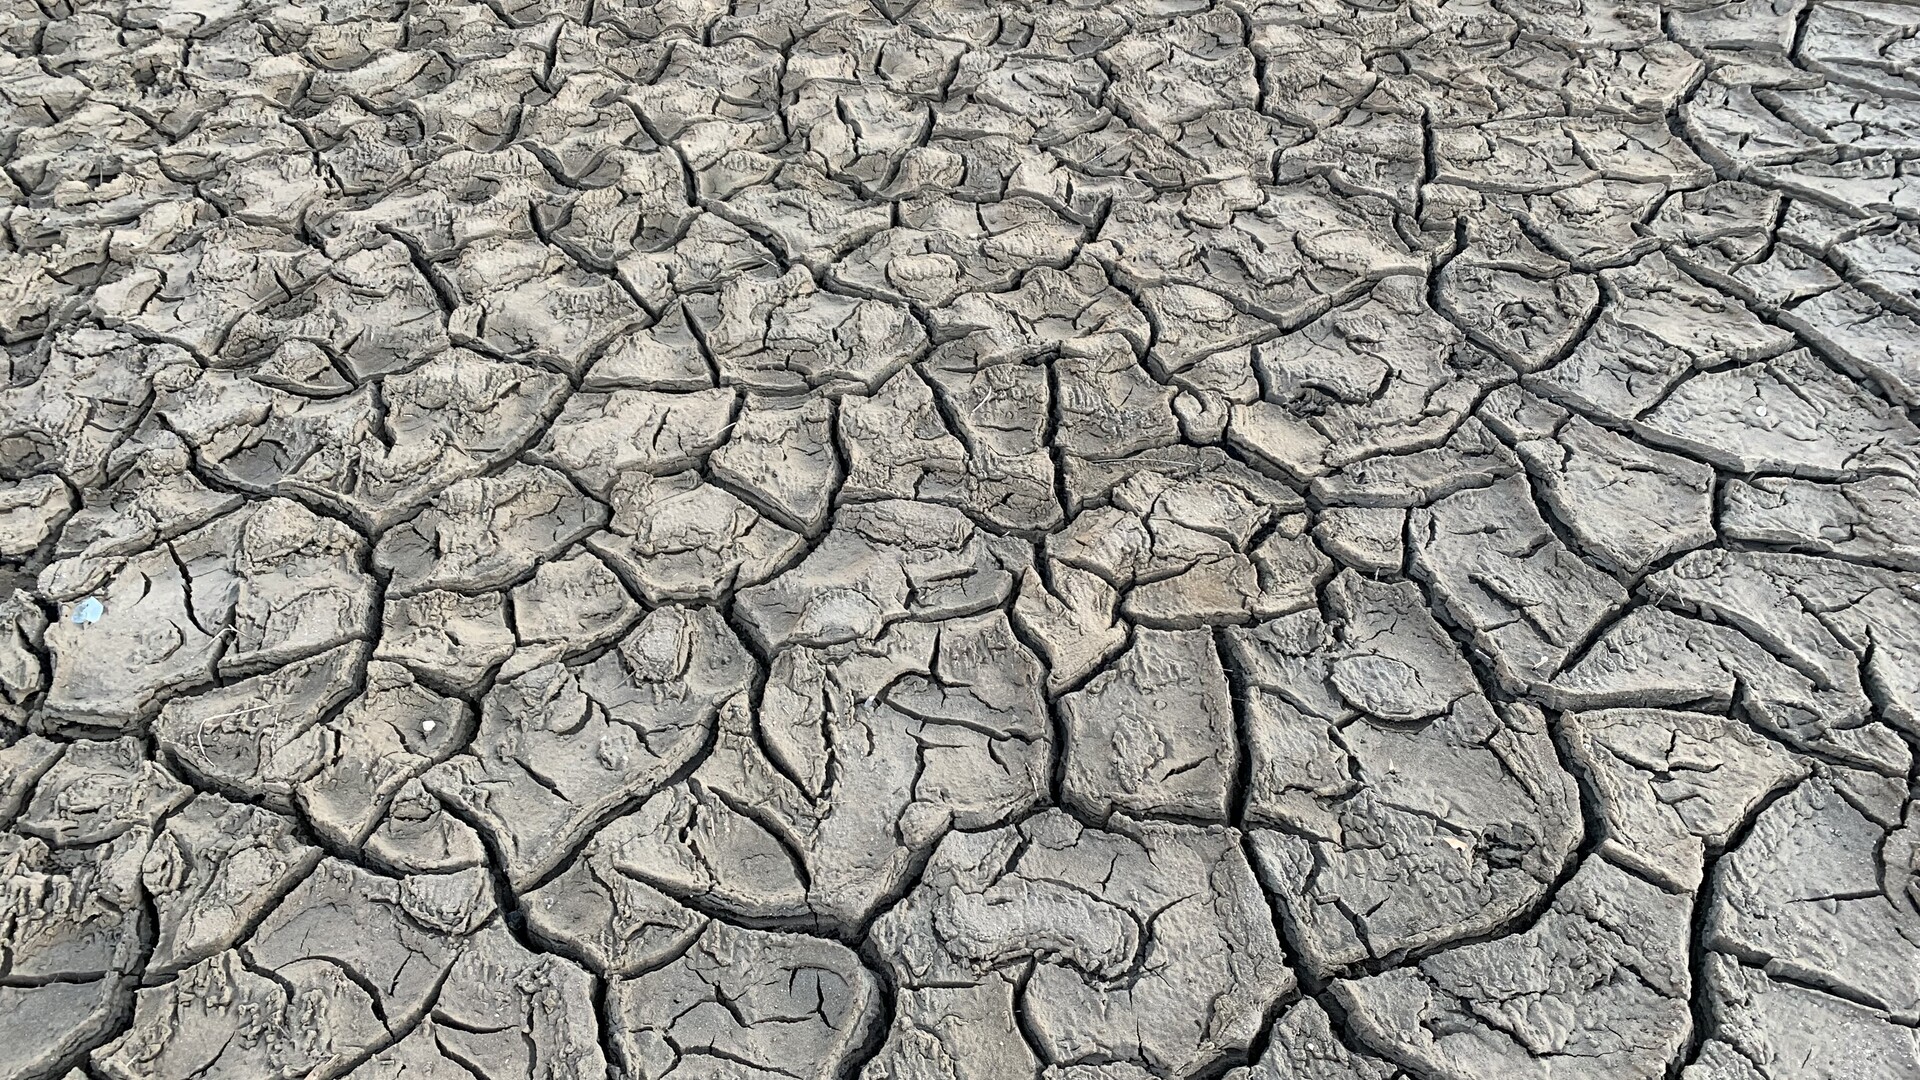 Plan for Next Year’s Crop Resilience Amidst Severe Drought